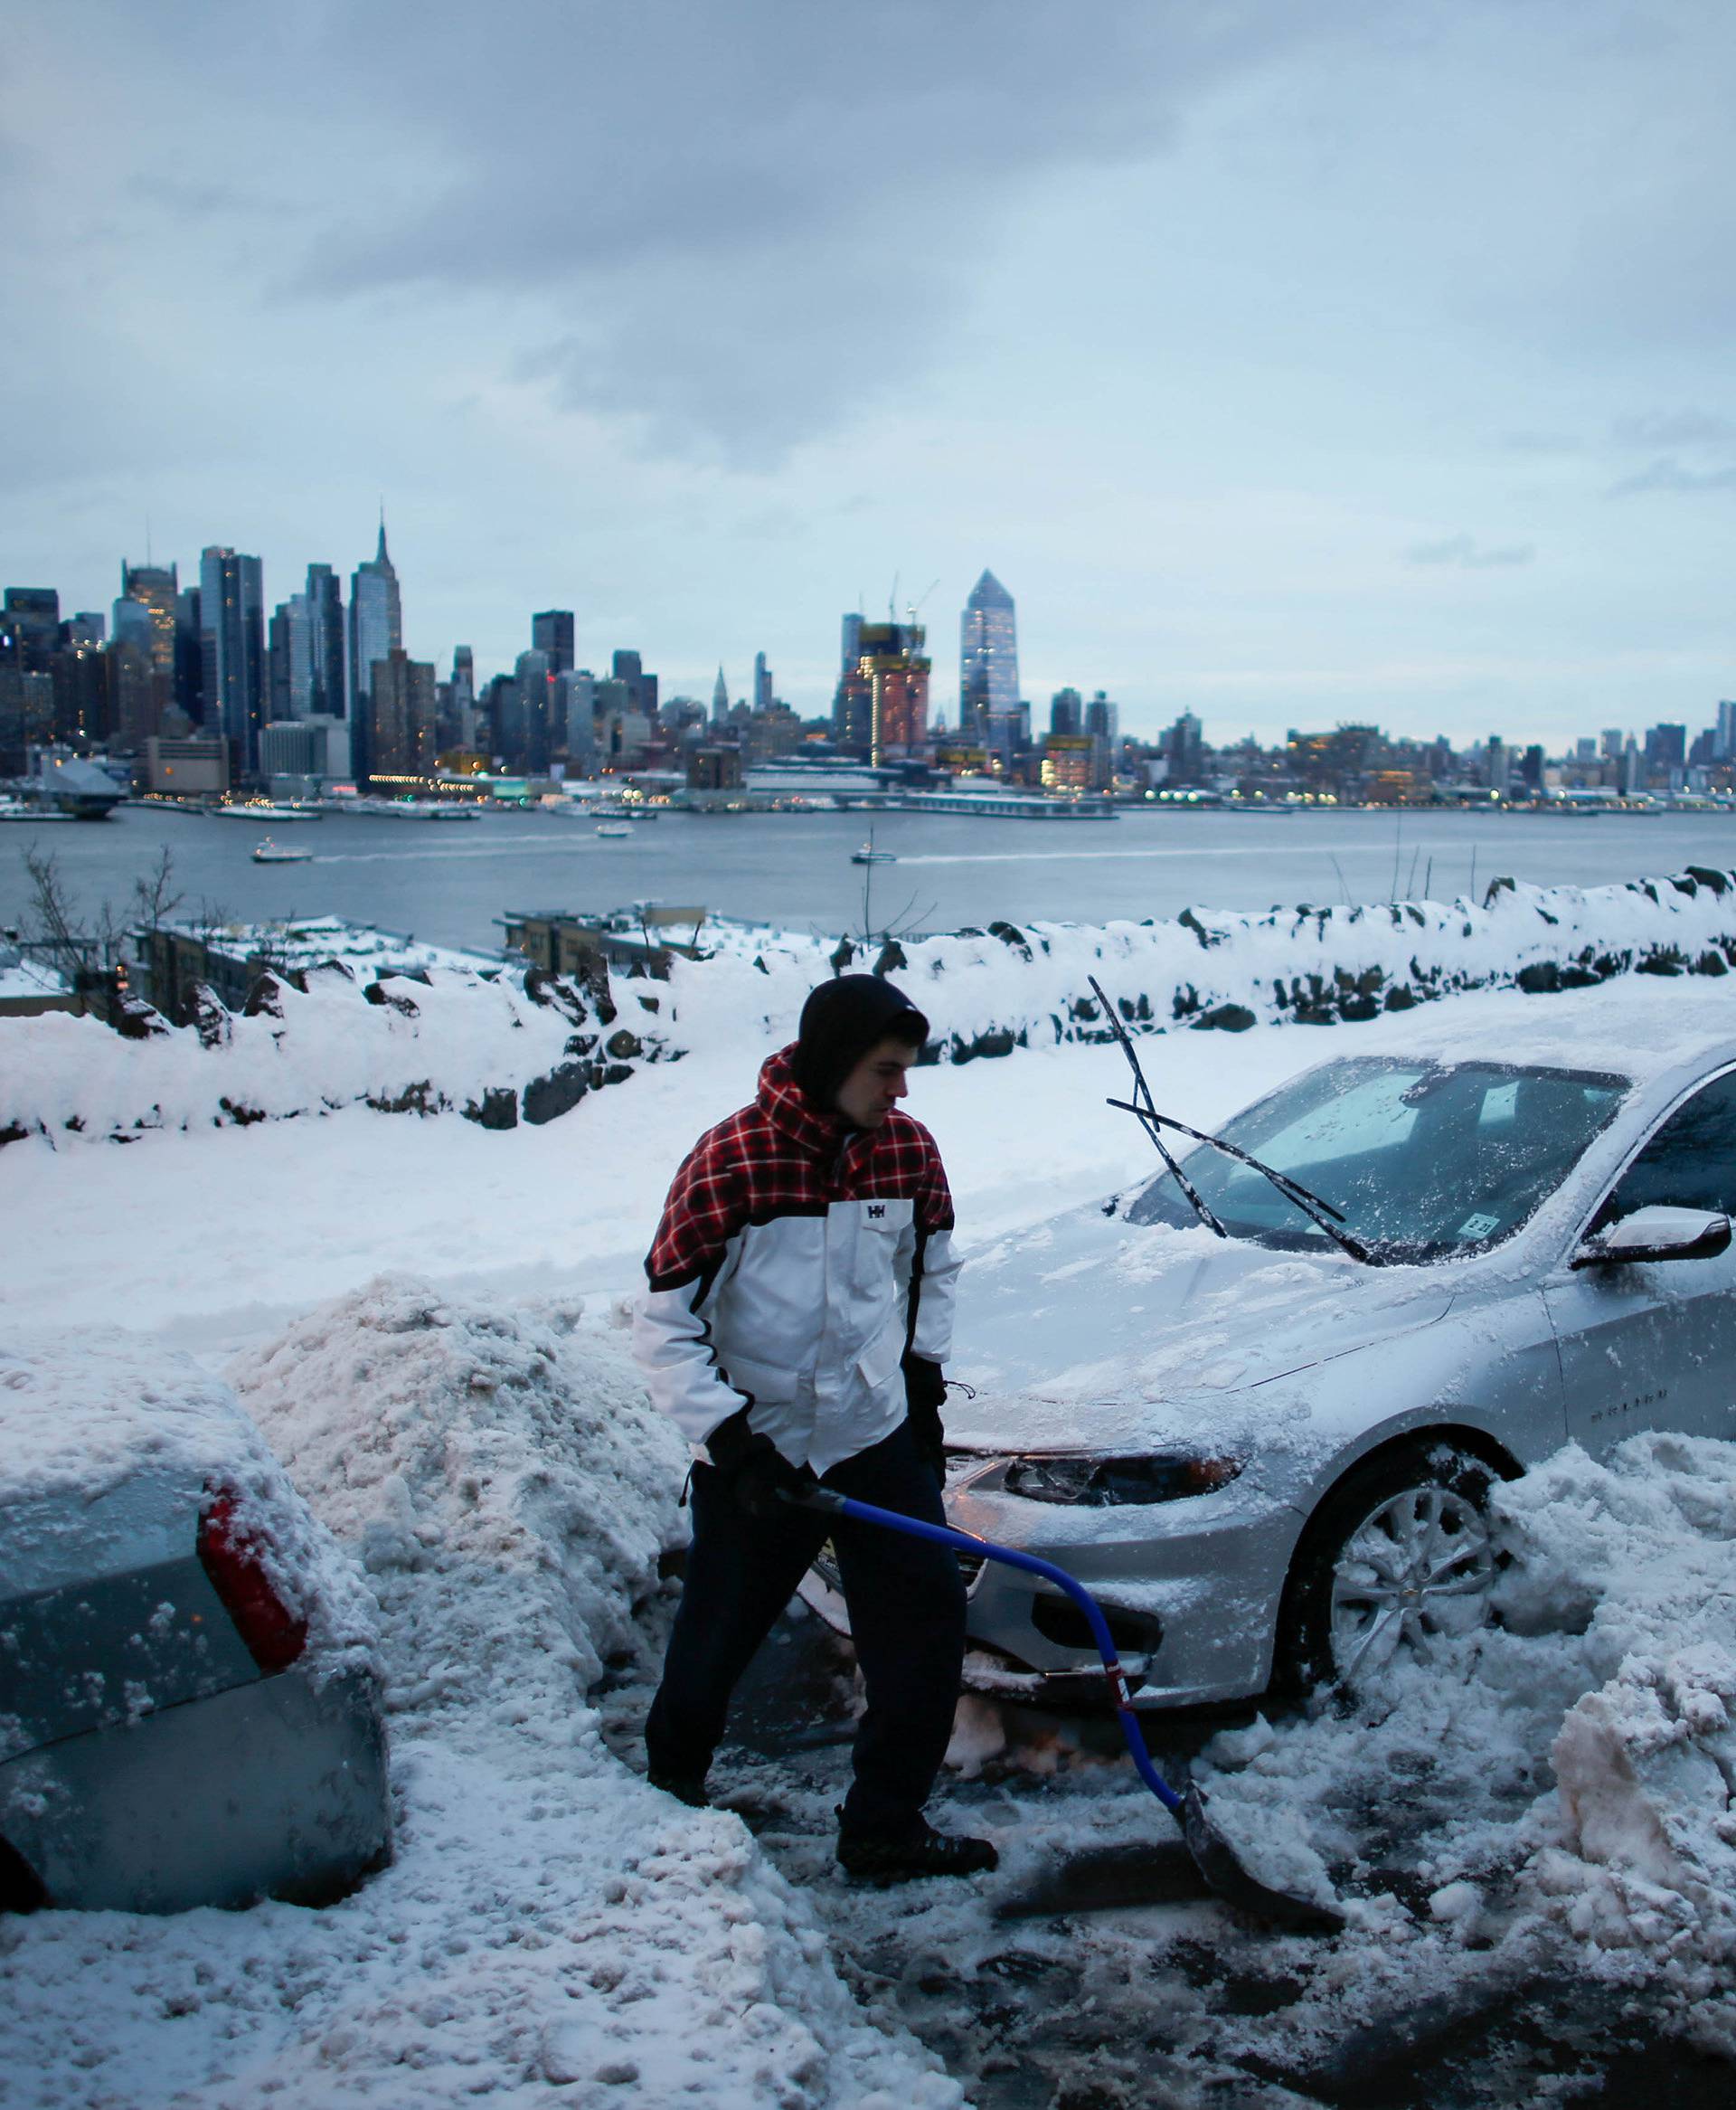 Residents clear their cars and street of snow in Weehawken, New Jersey, as the skyline of Manhattan and the Hudson River are seen after a snowstorm in New York